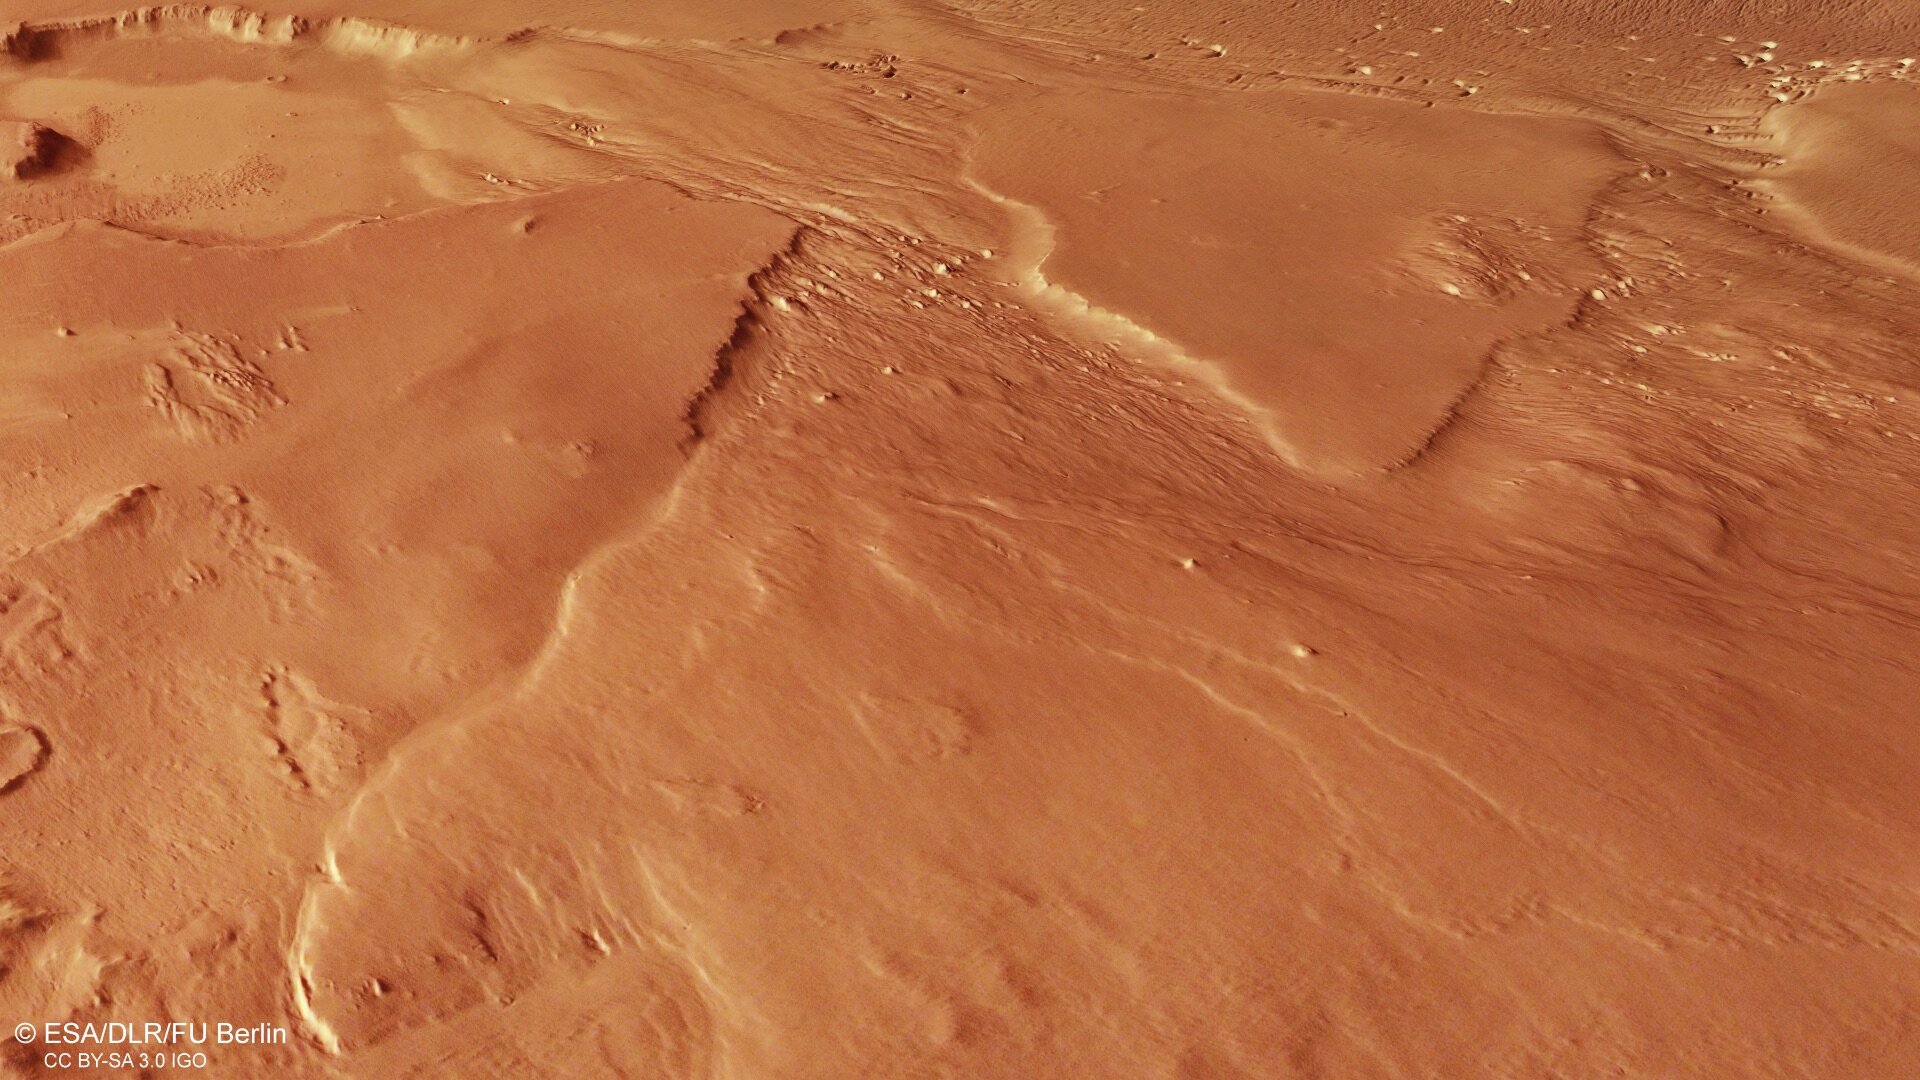 Second perspective view of Medusae Fossae